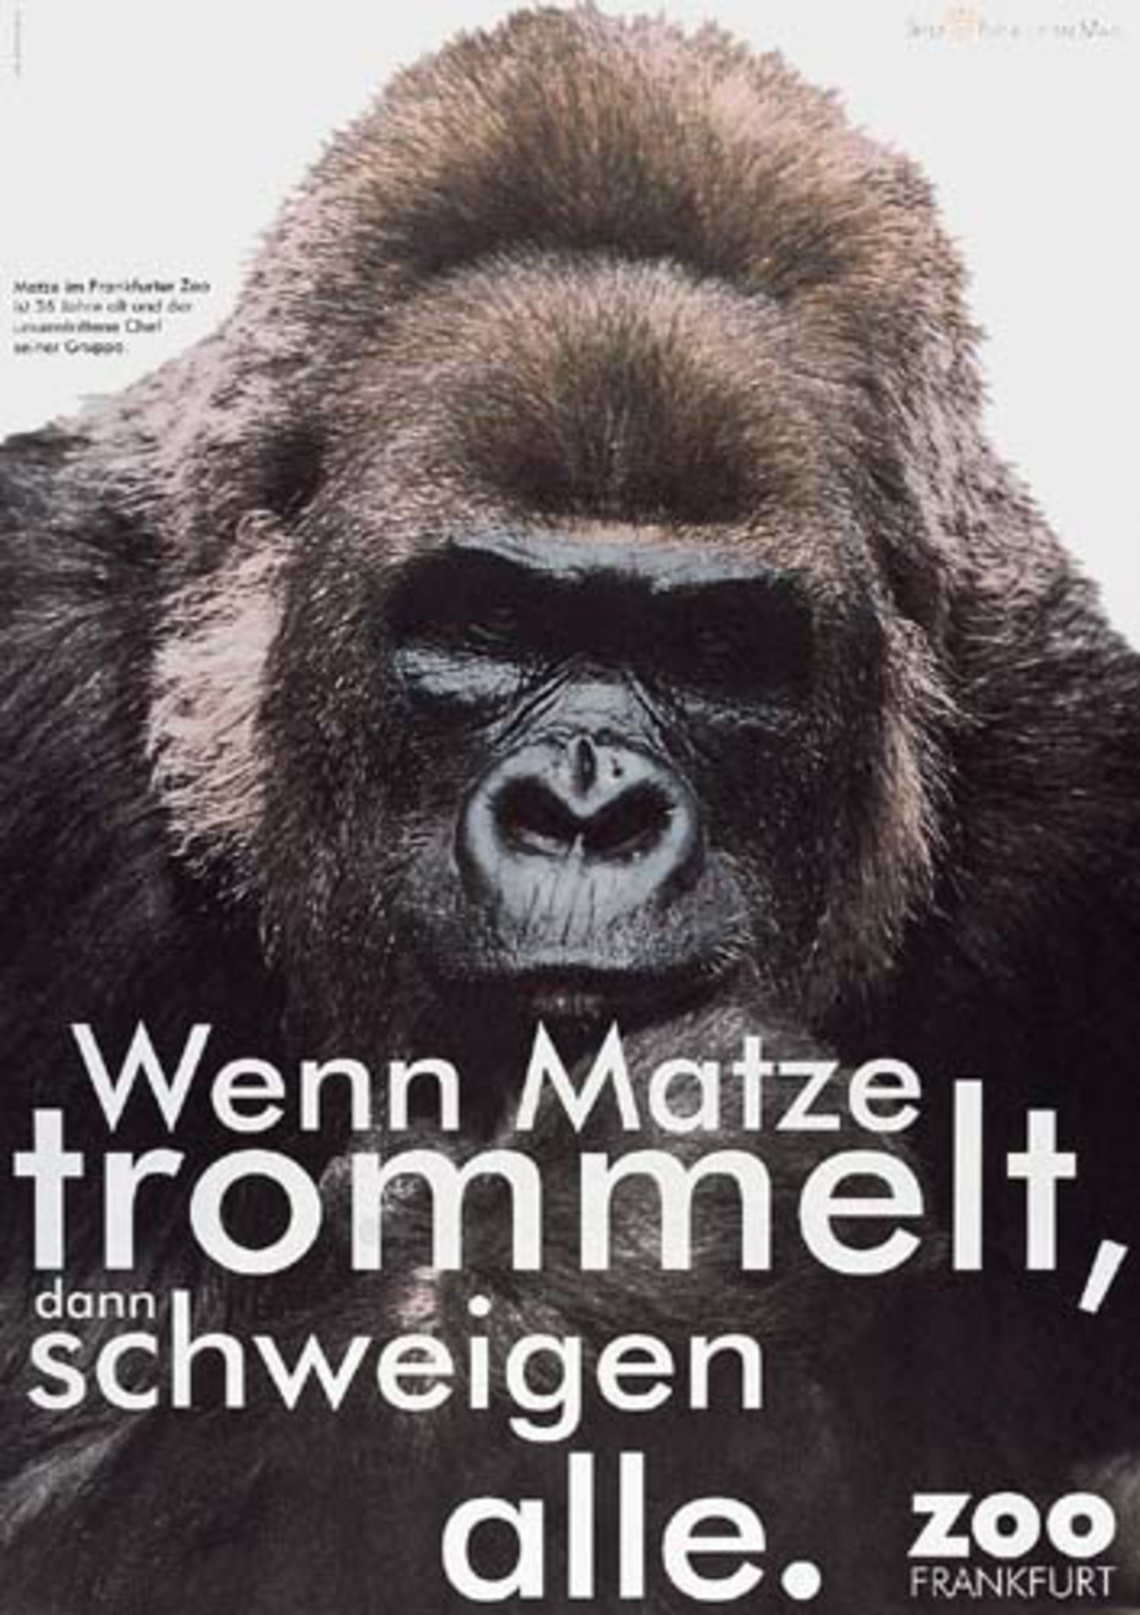 When Matze starts beating his chest everyone shuts up. Poster campaign for the Frankfurt zoo.